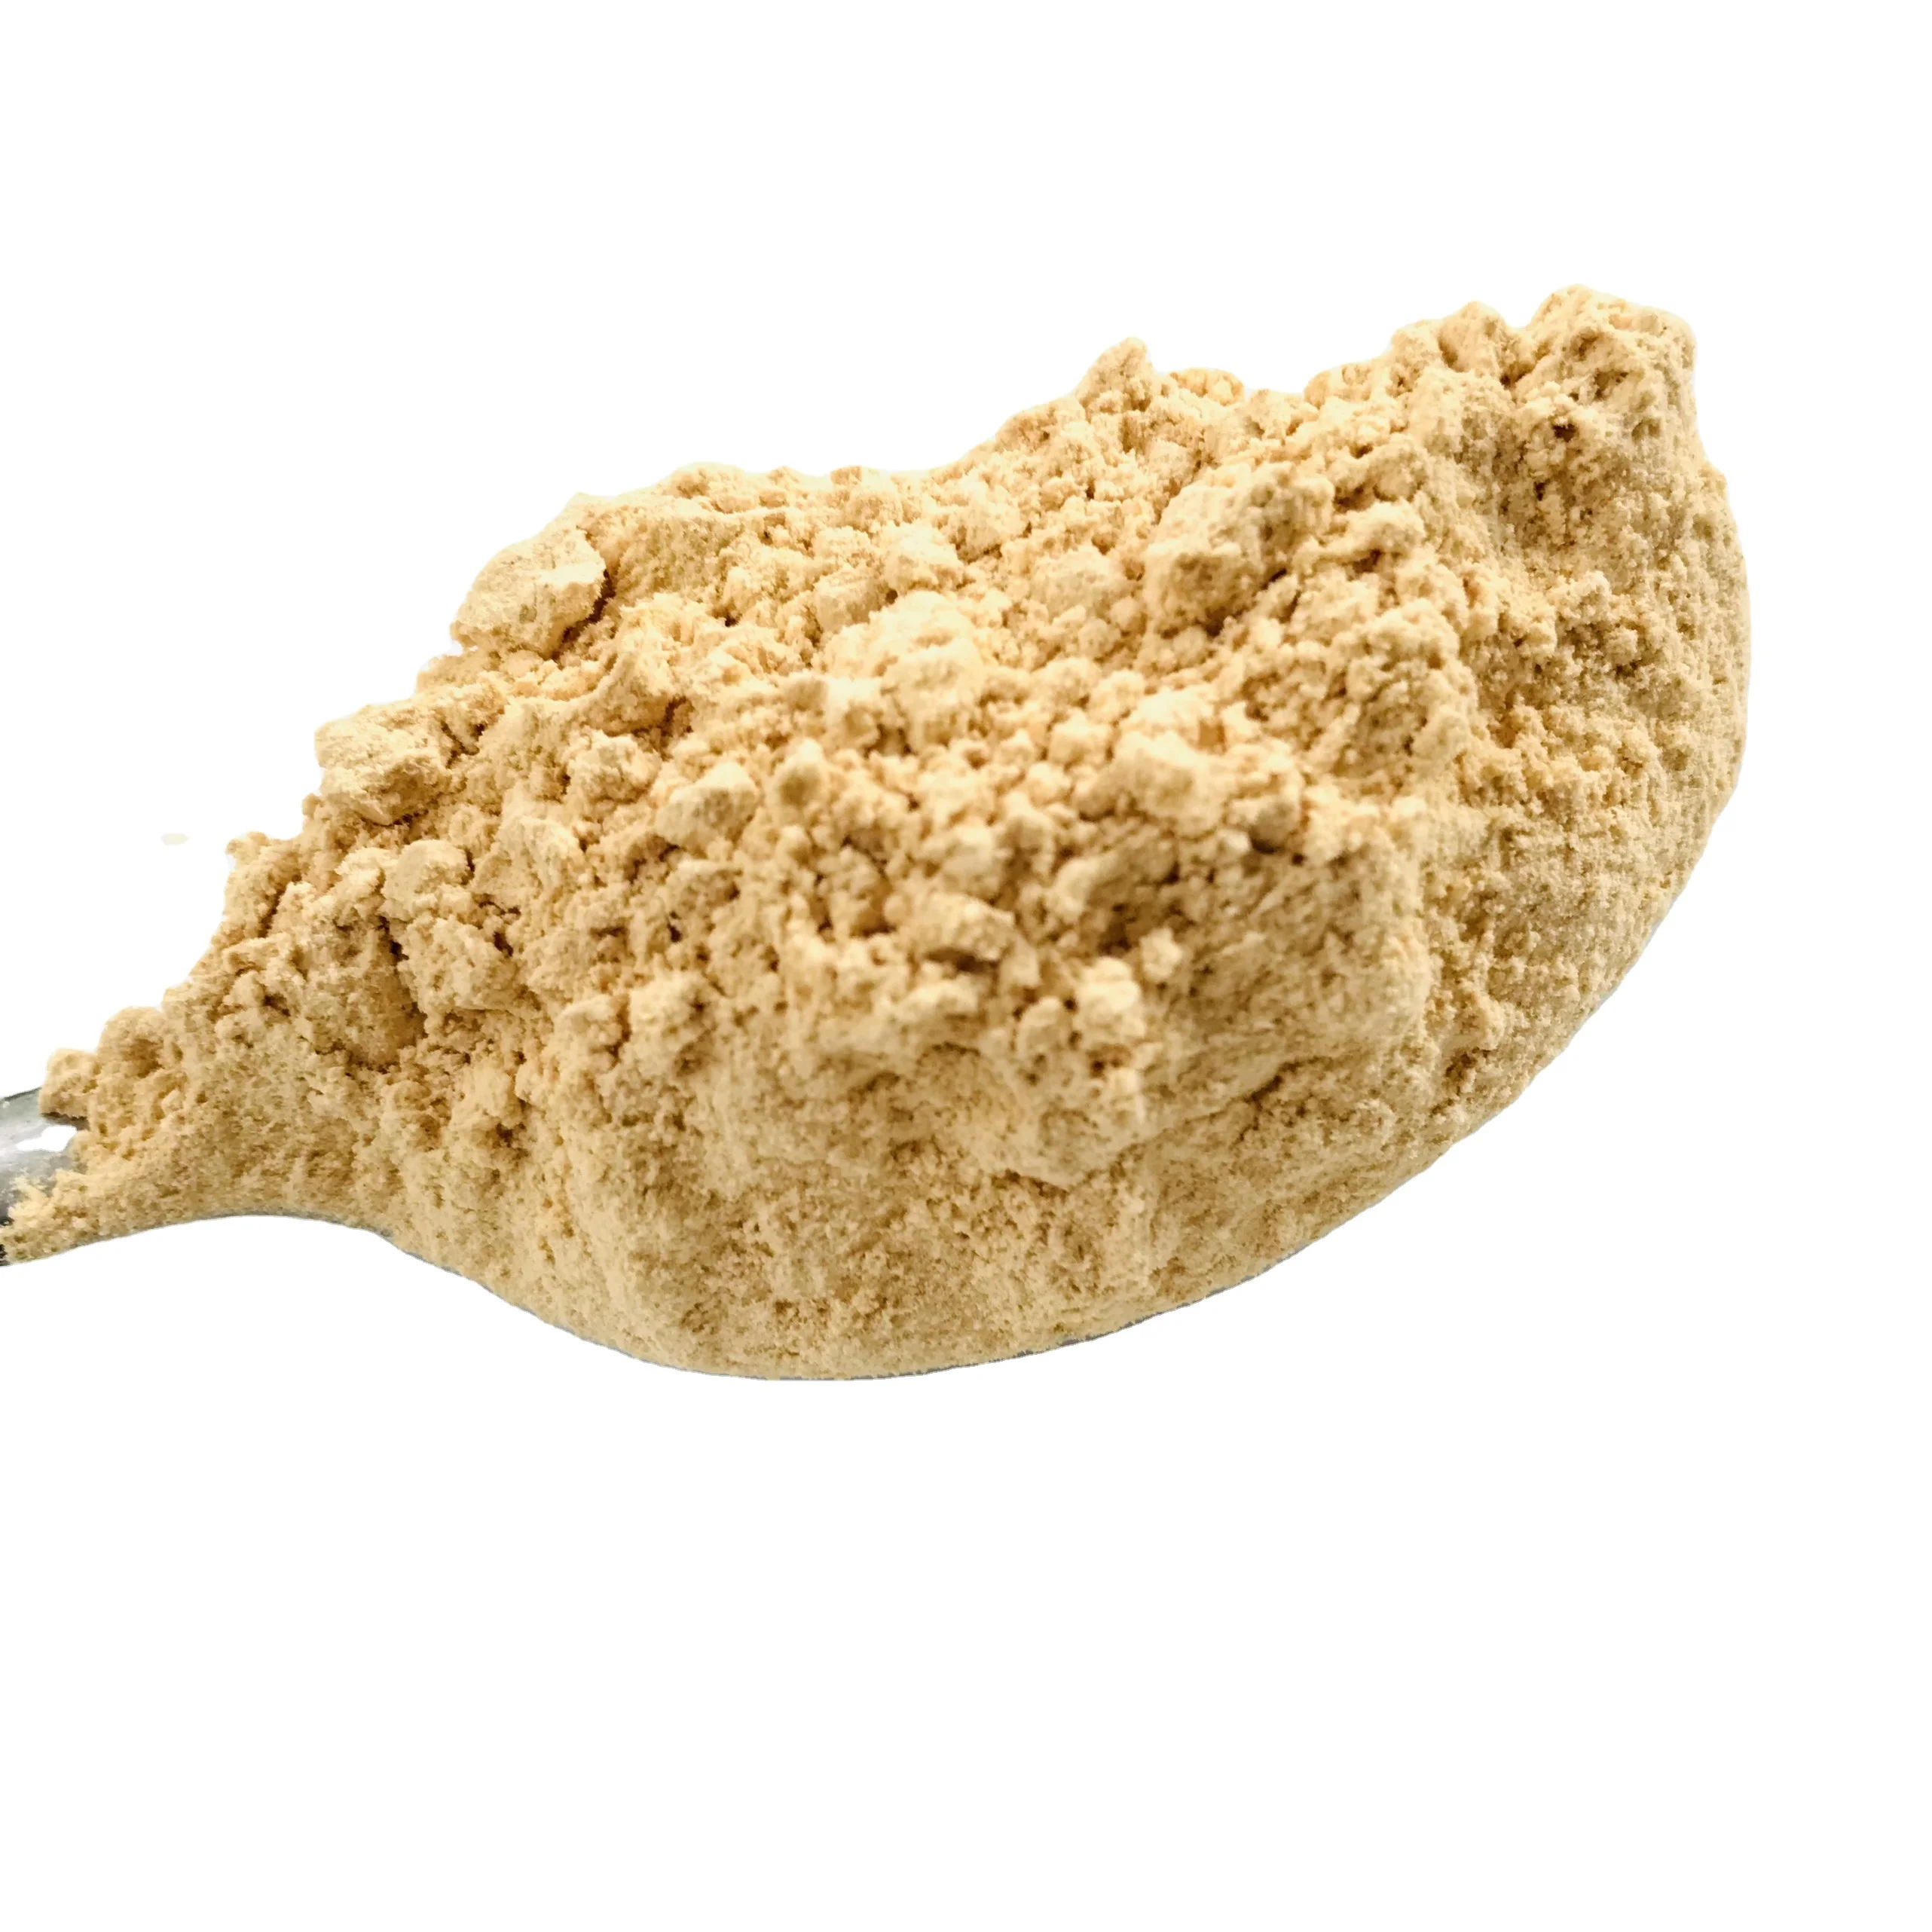 
Cordyceps Militaris Powder Healthy Product 100% Natural Herbal High Quality Product Good For Health Providing Energy OEM 